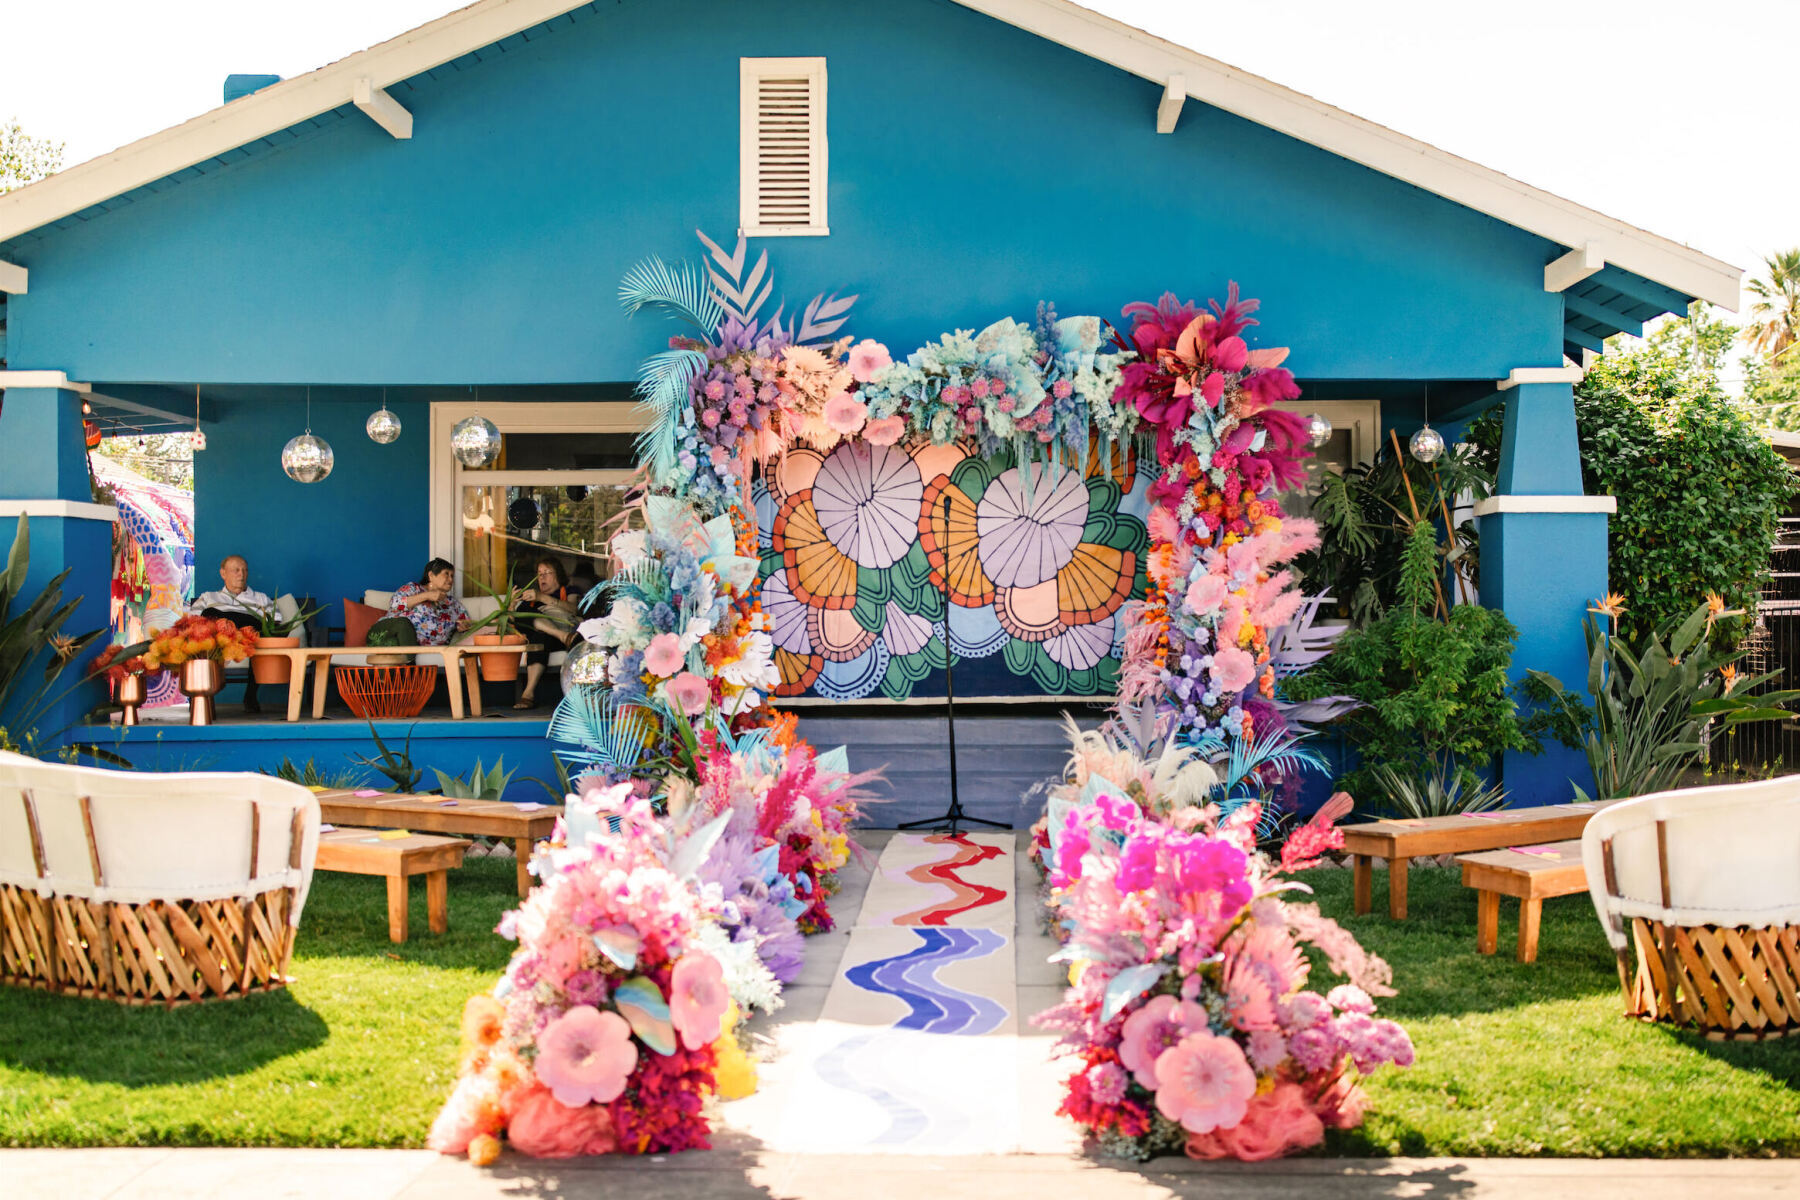 At this vibrant outdoor wedding, the couple's teal house was the backdrop, with the ceremony taking place in the front yard, anchored by a colorful floral installation leading to the porch.